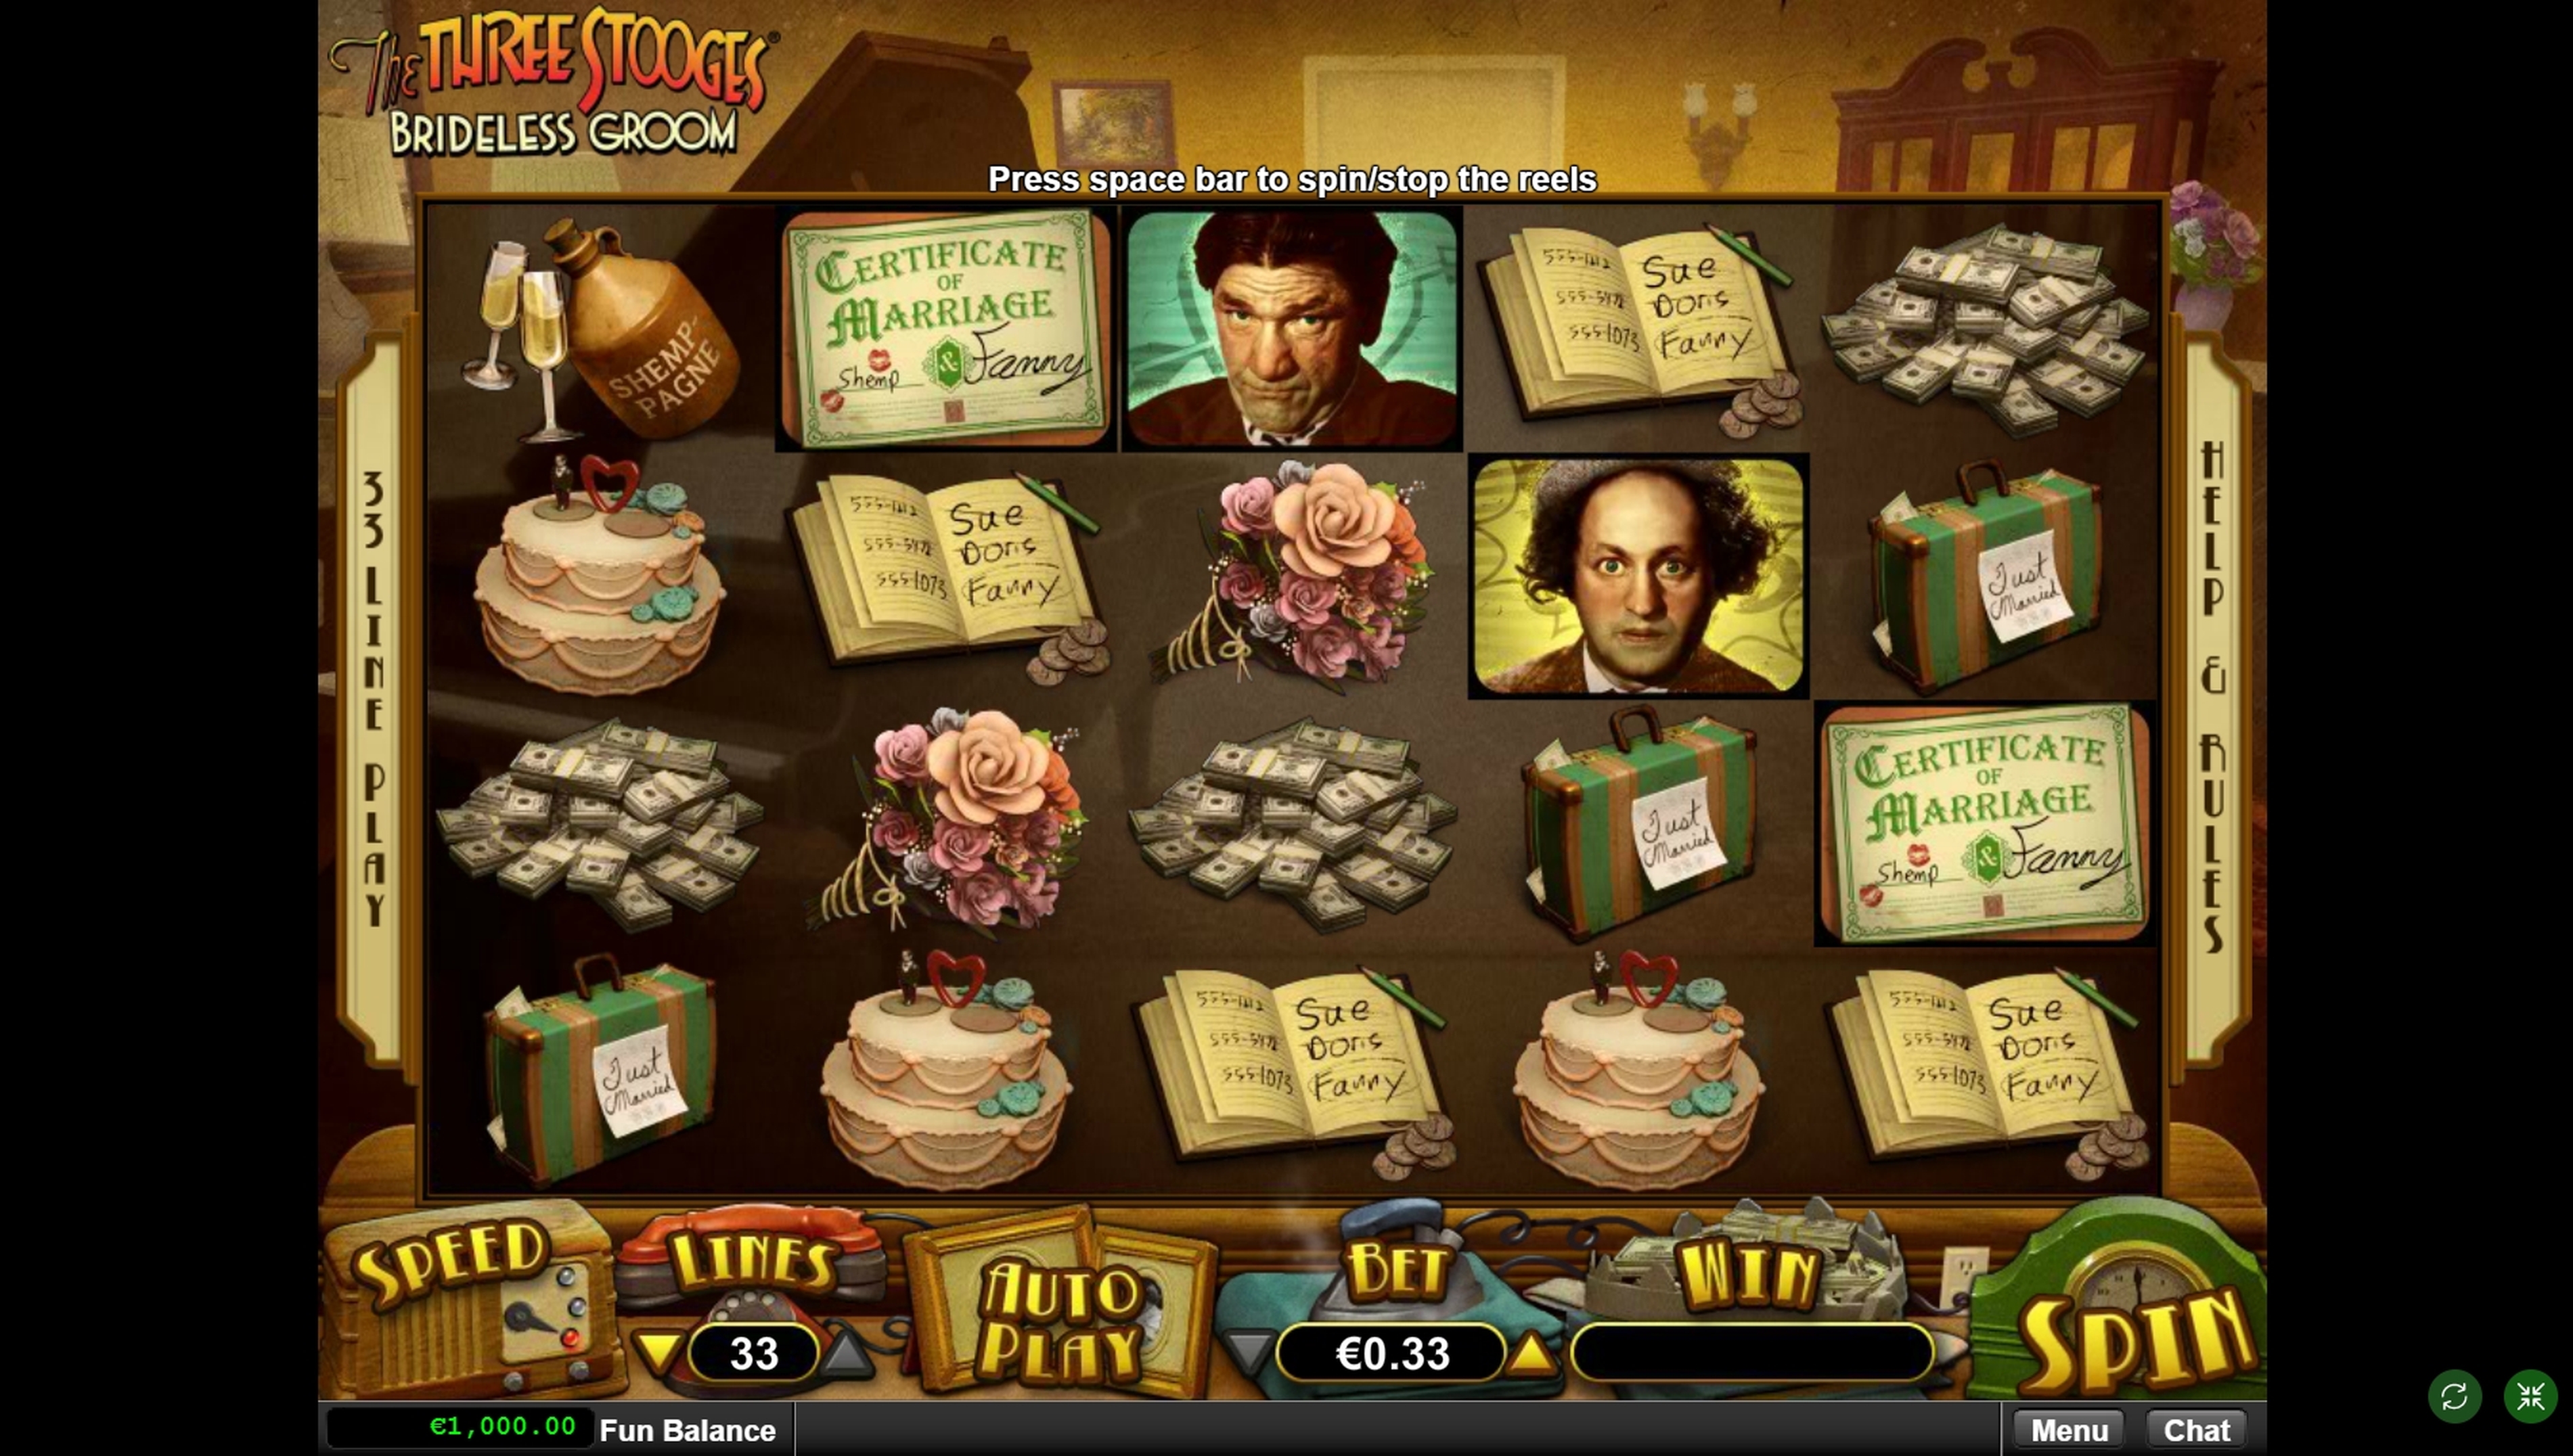 Reels in The Three Stooges Brideless Groom Slot Game by Real Time Gaming